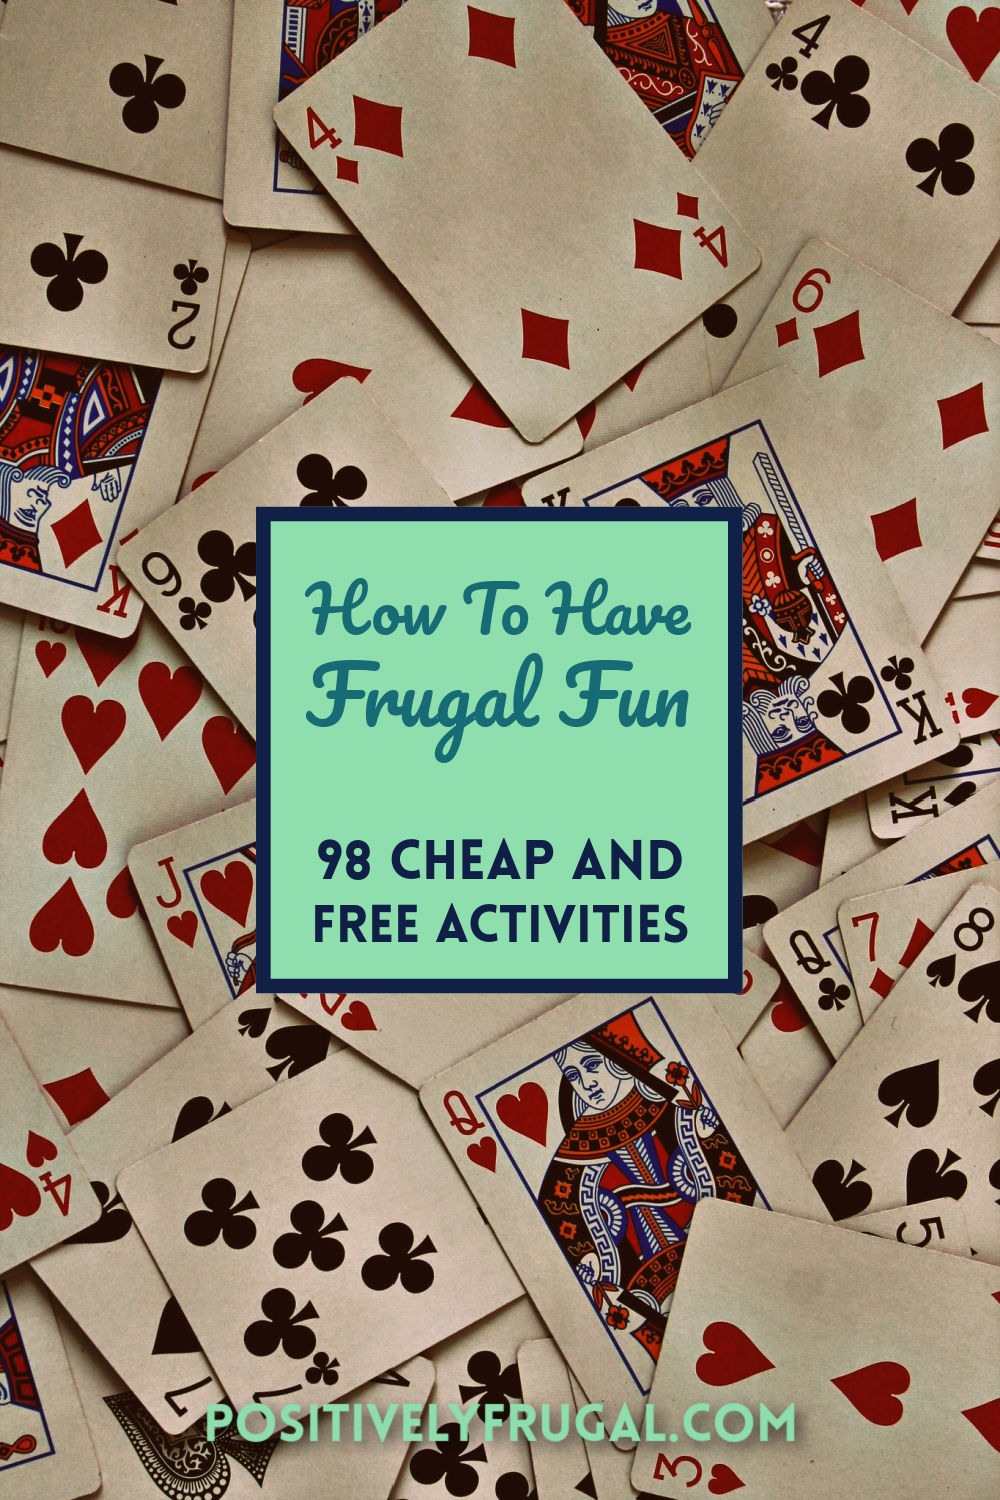 How To Have Frugal Fun Cheap and Free Activities by PositivelyFrugal.com